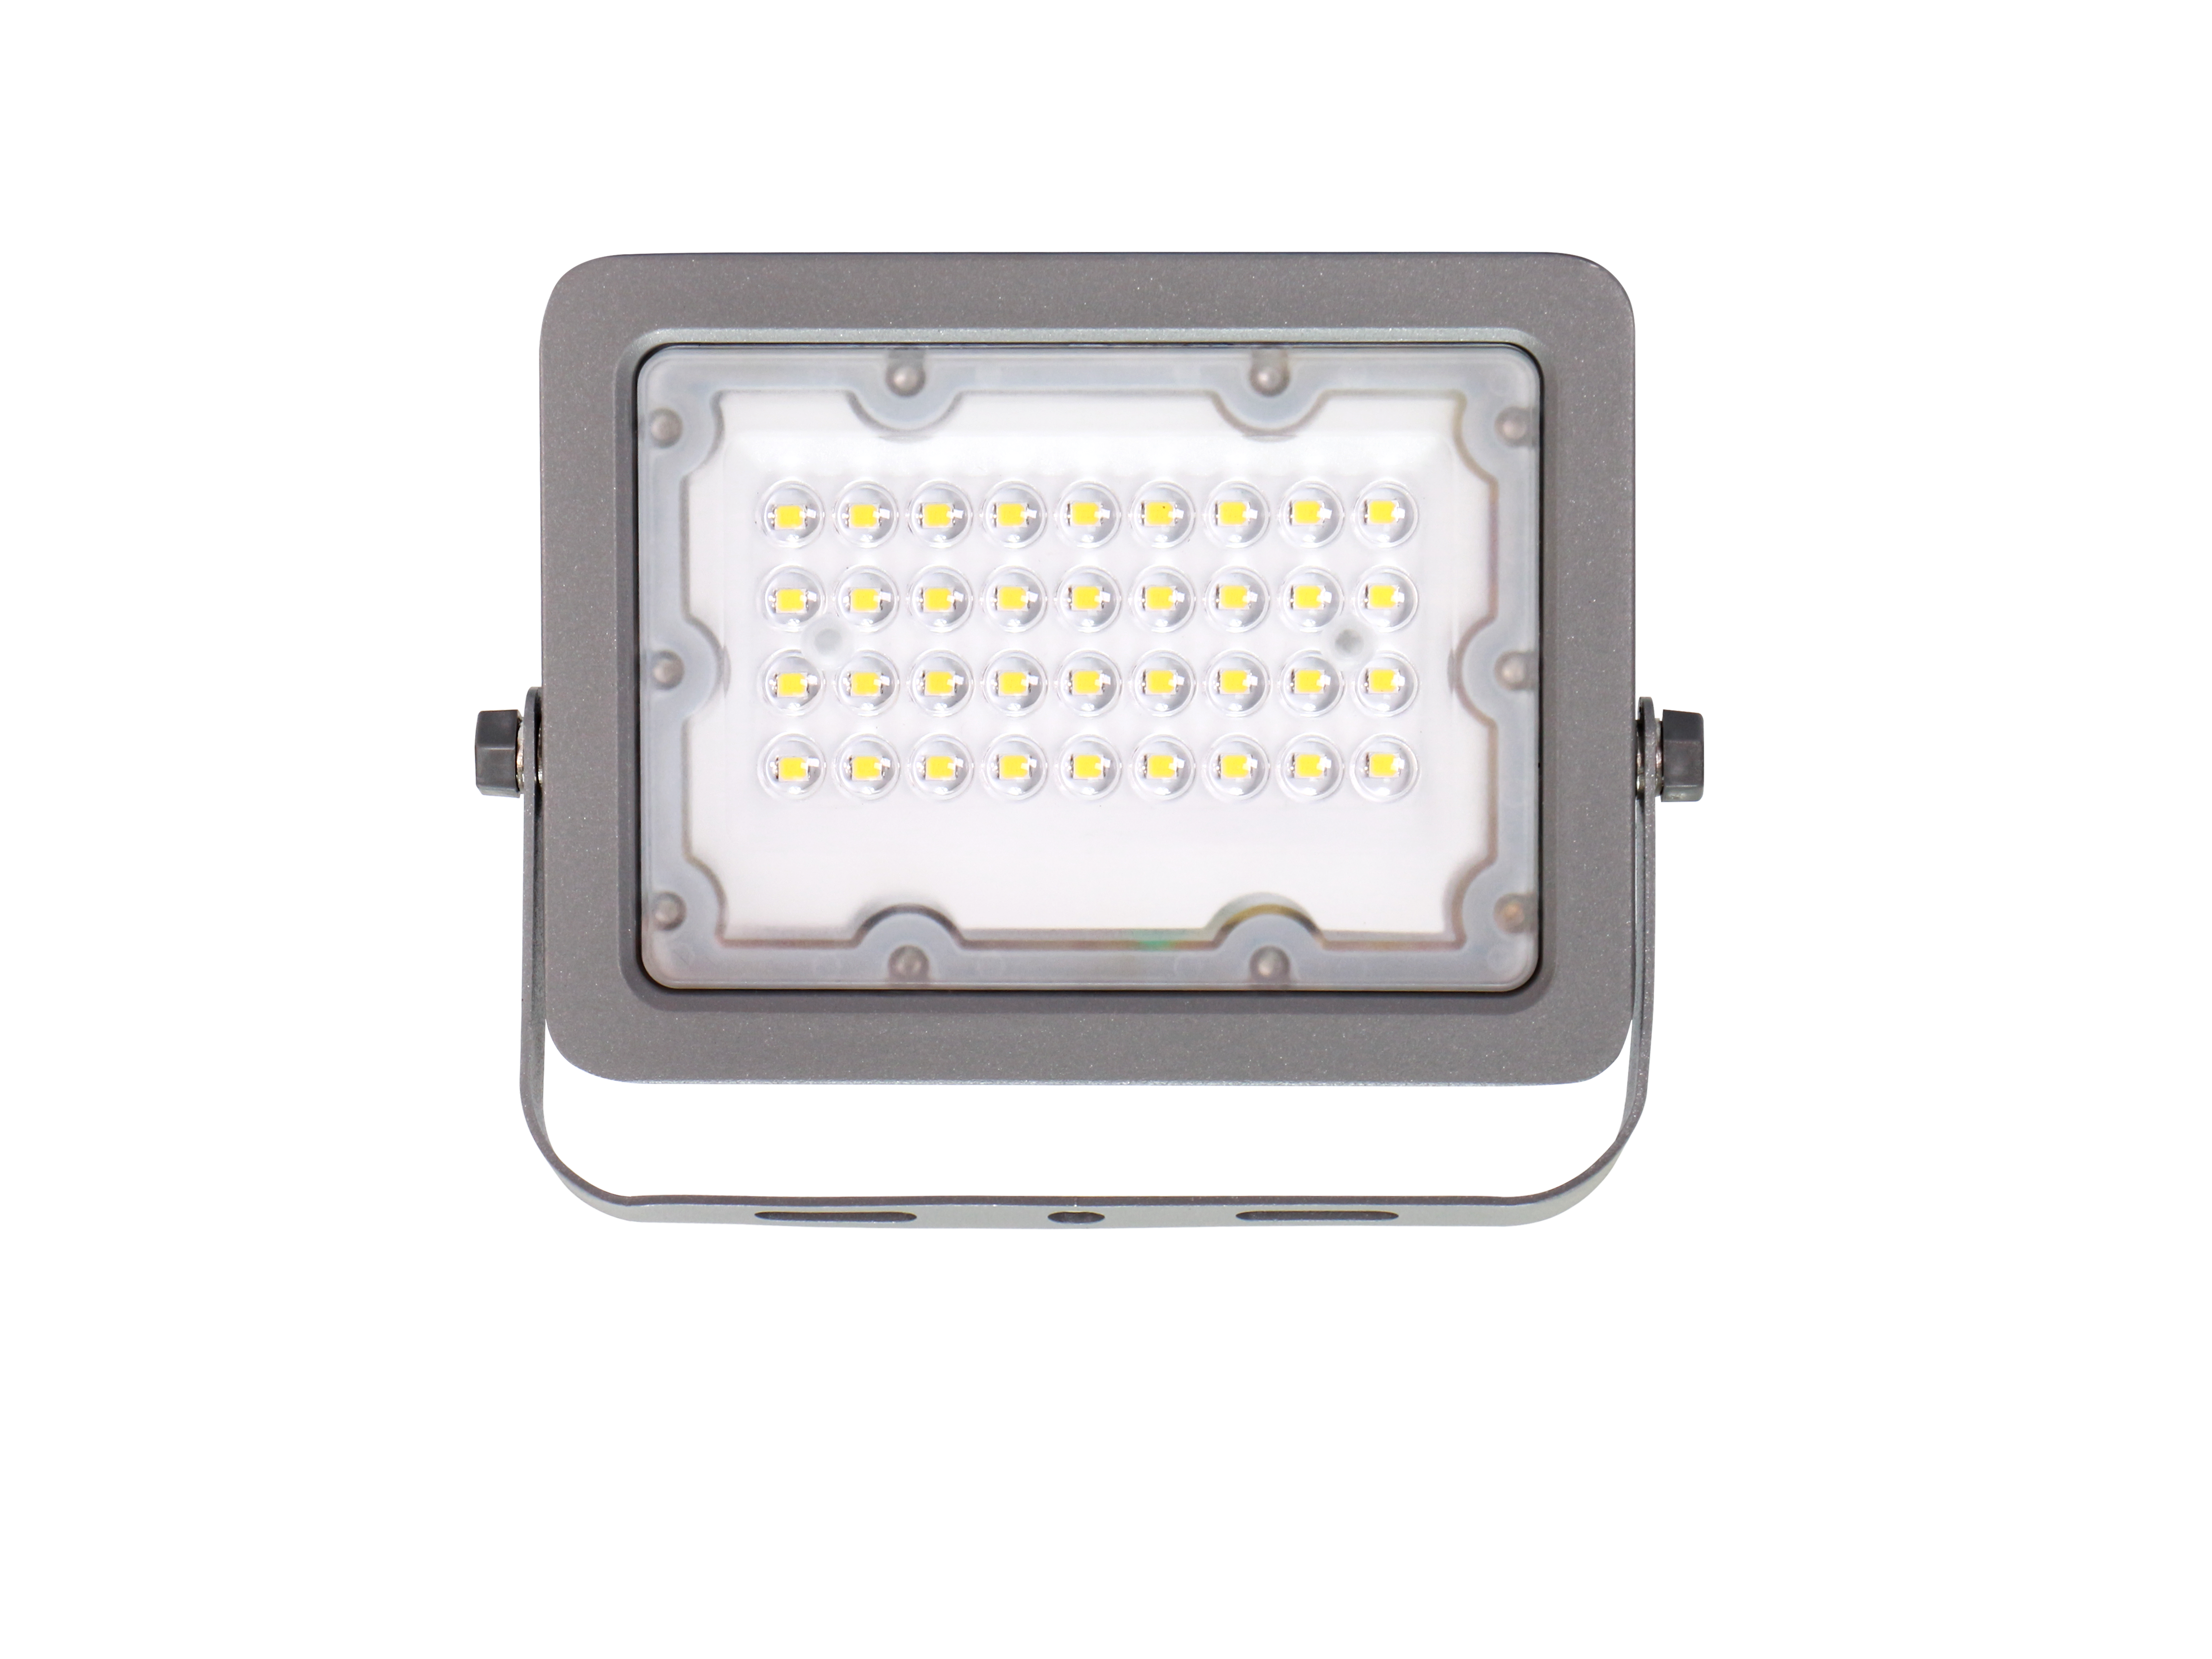 Top-rated 5ft LED Fluorescent Fitting for Bright and Energy-efficient Lighting